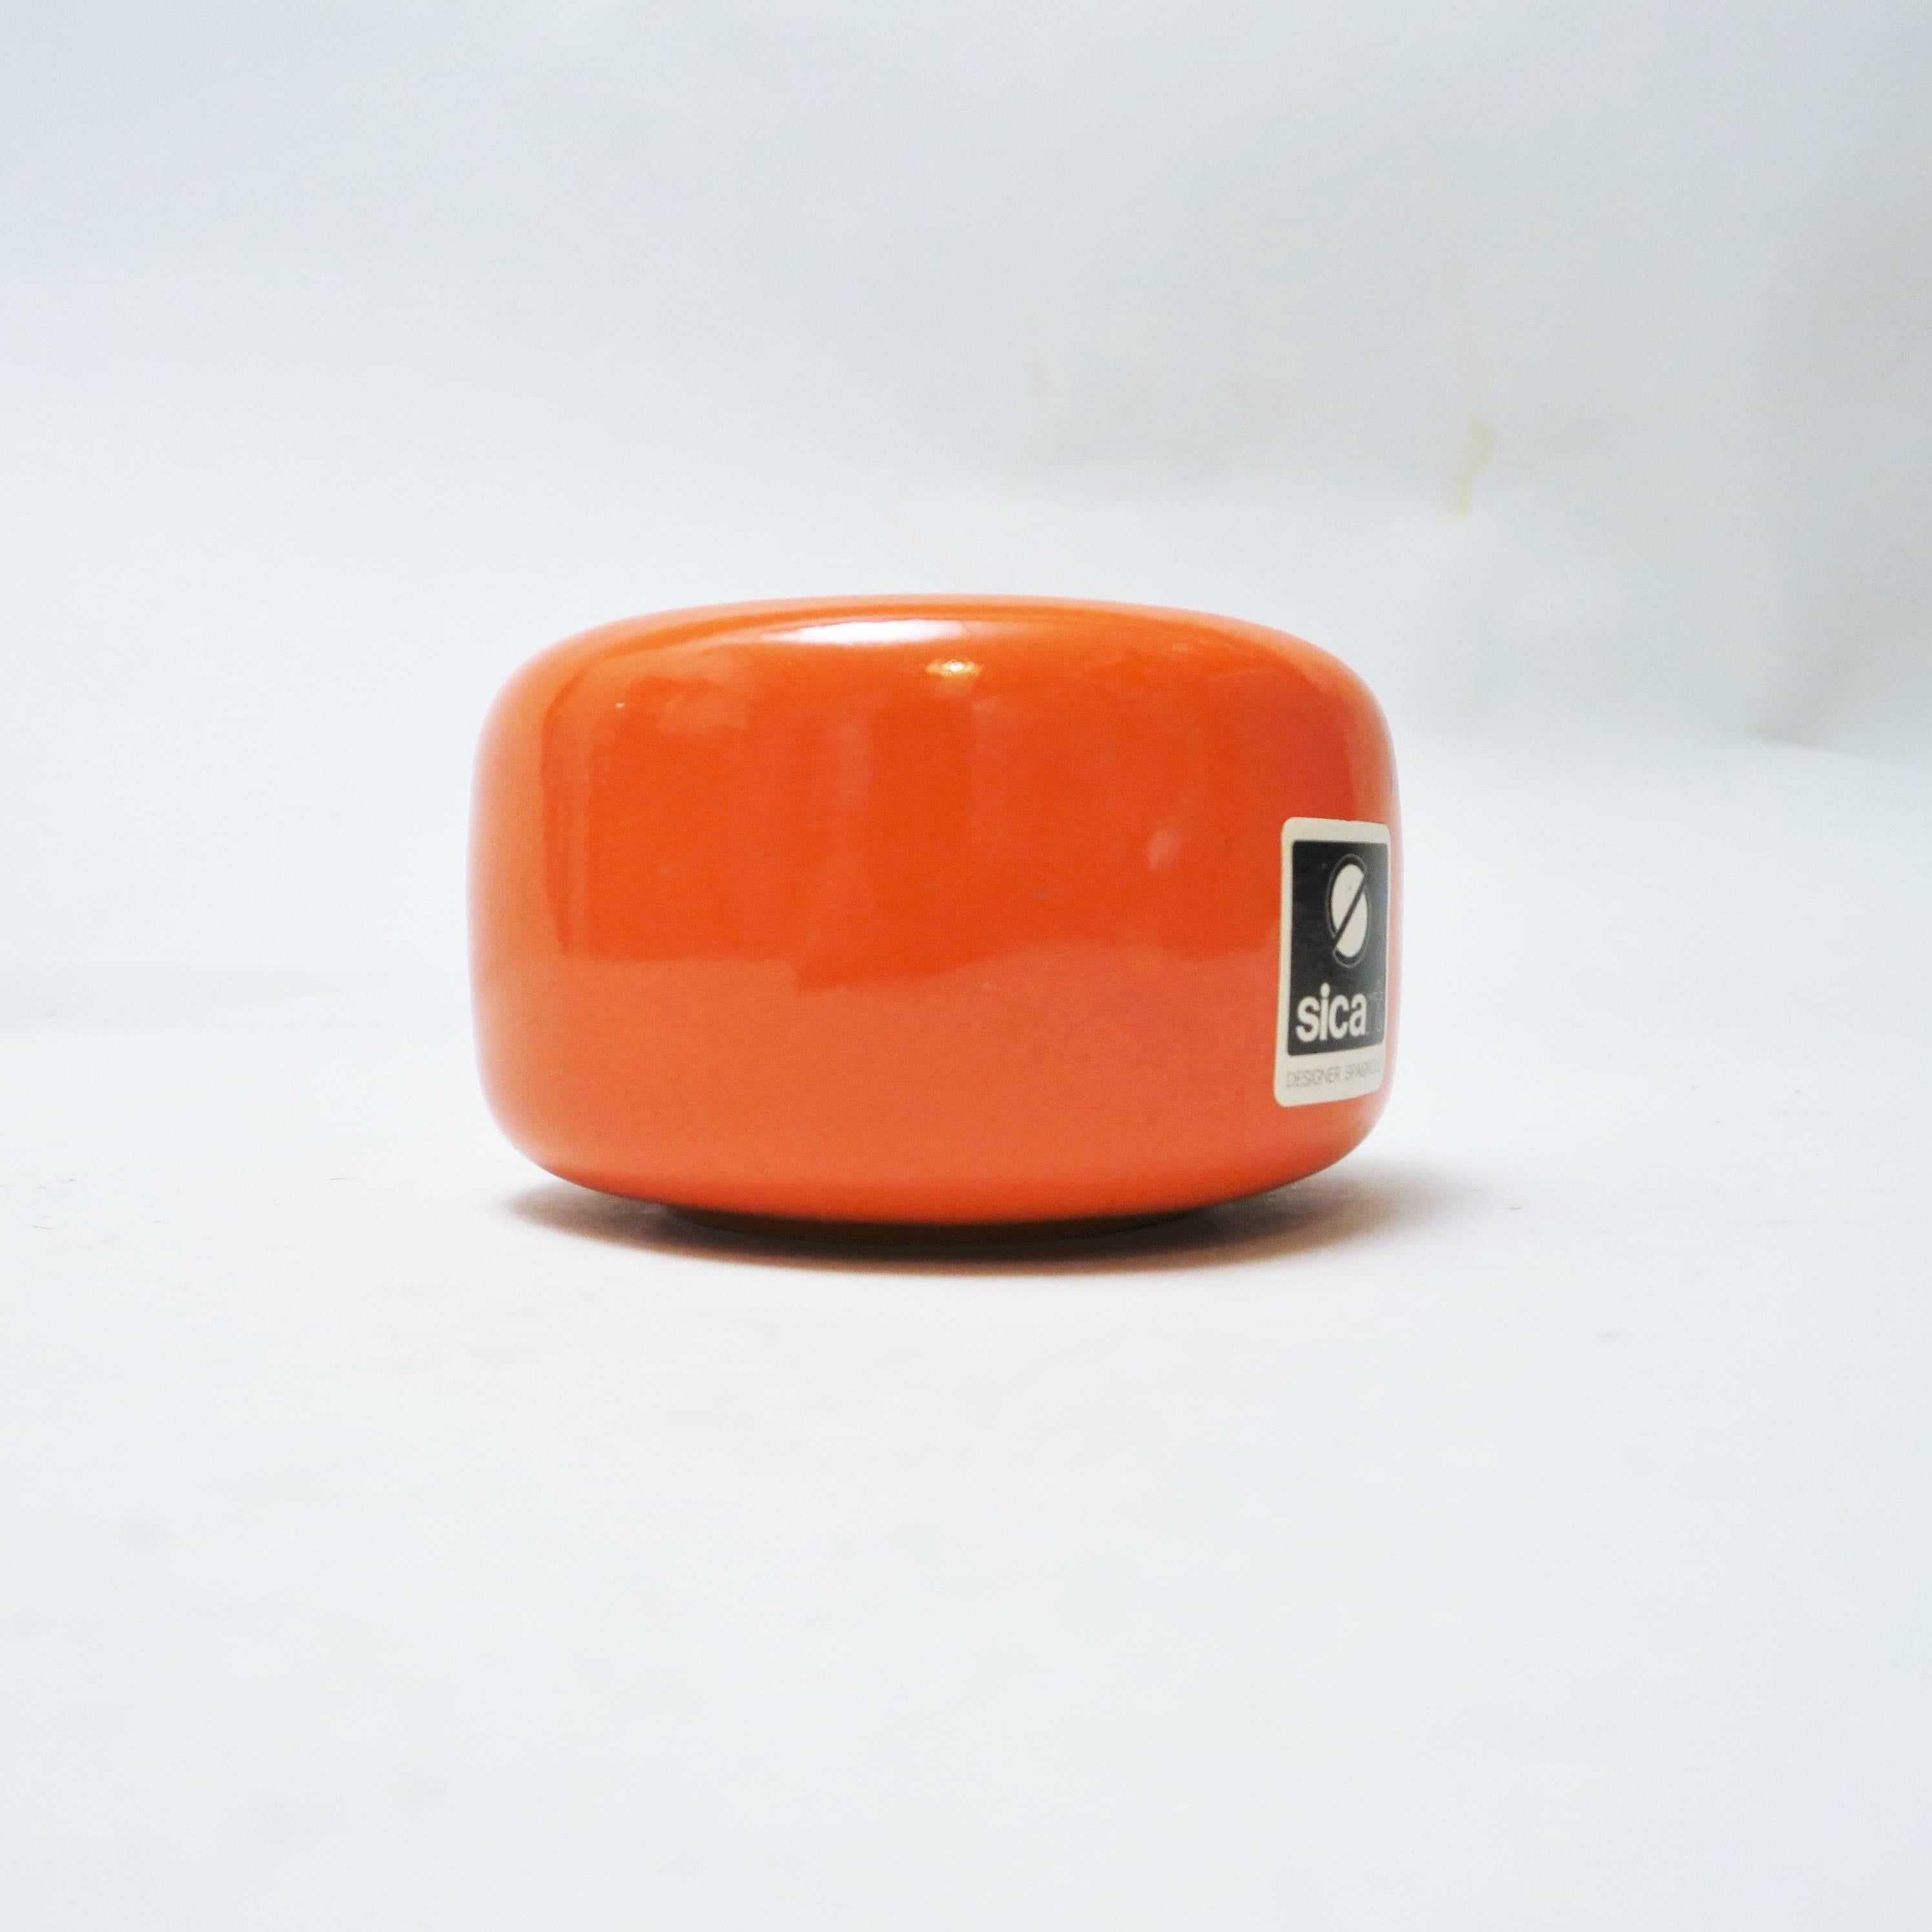 Space Age 1970s Orange Ceramic Ashtray by Pino Spagnolo and Sicart For Sale